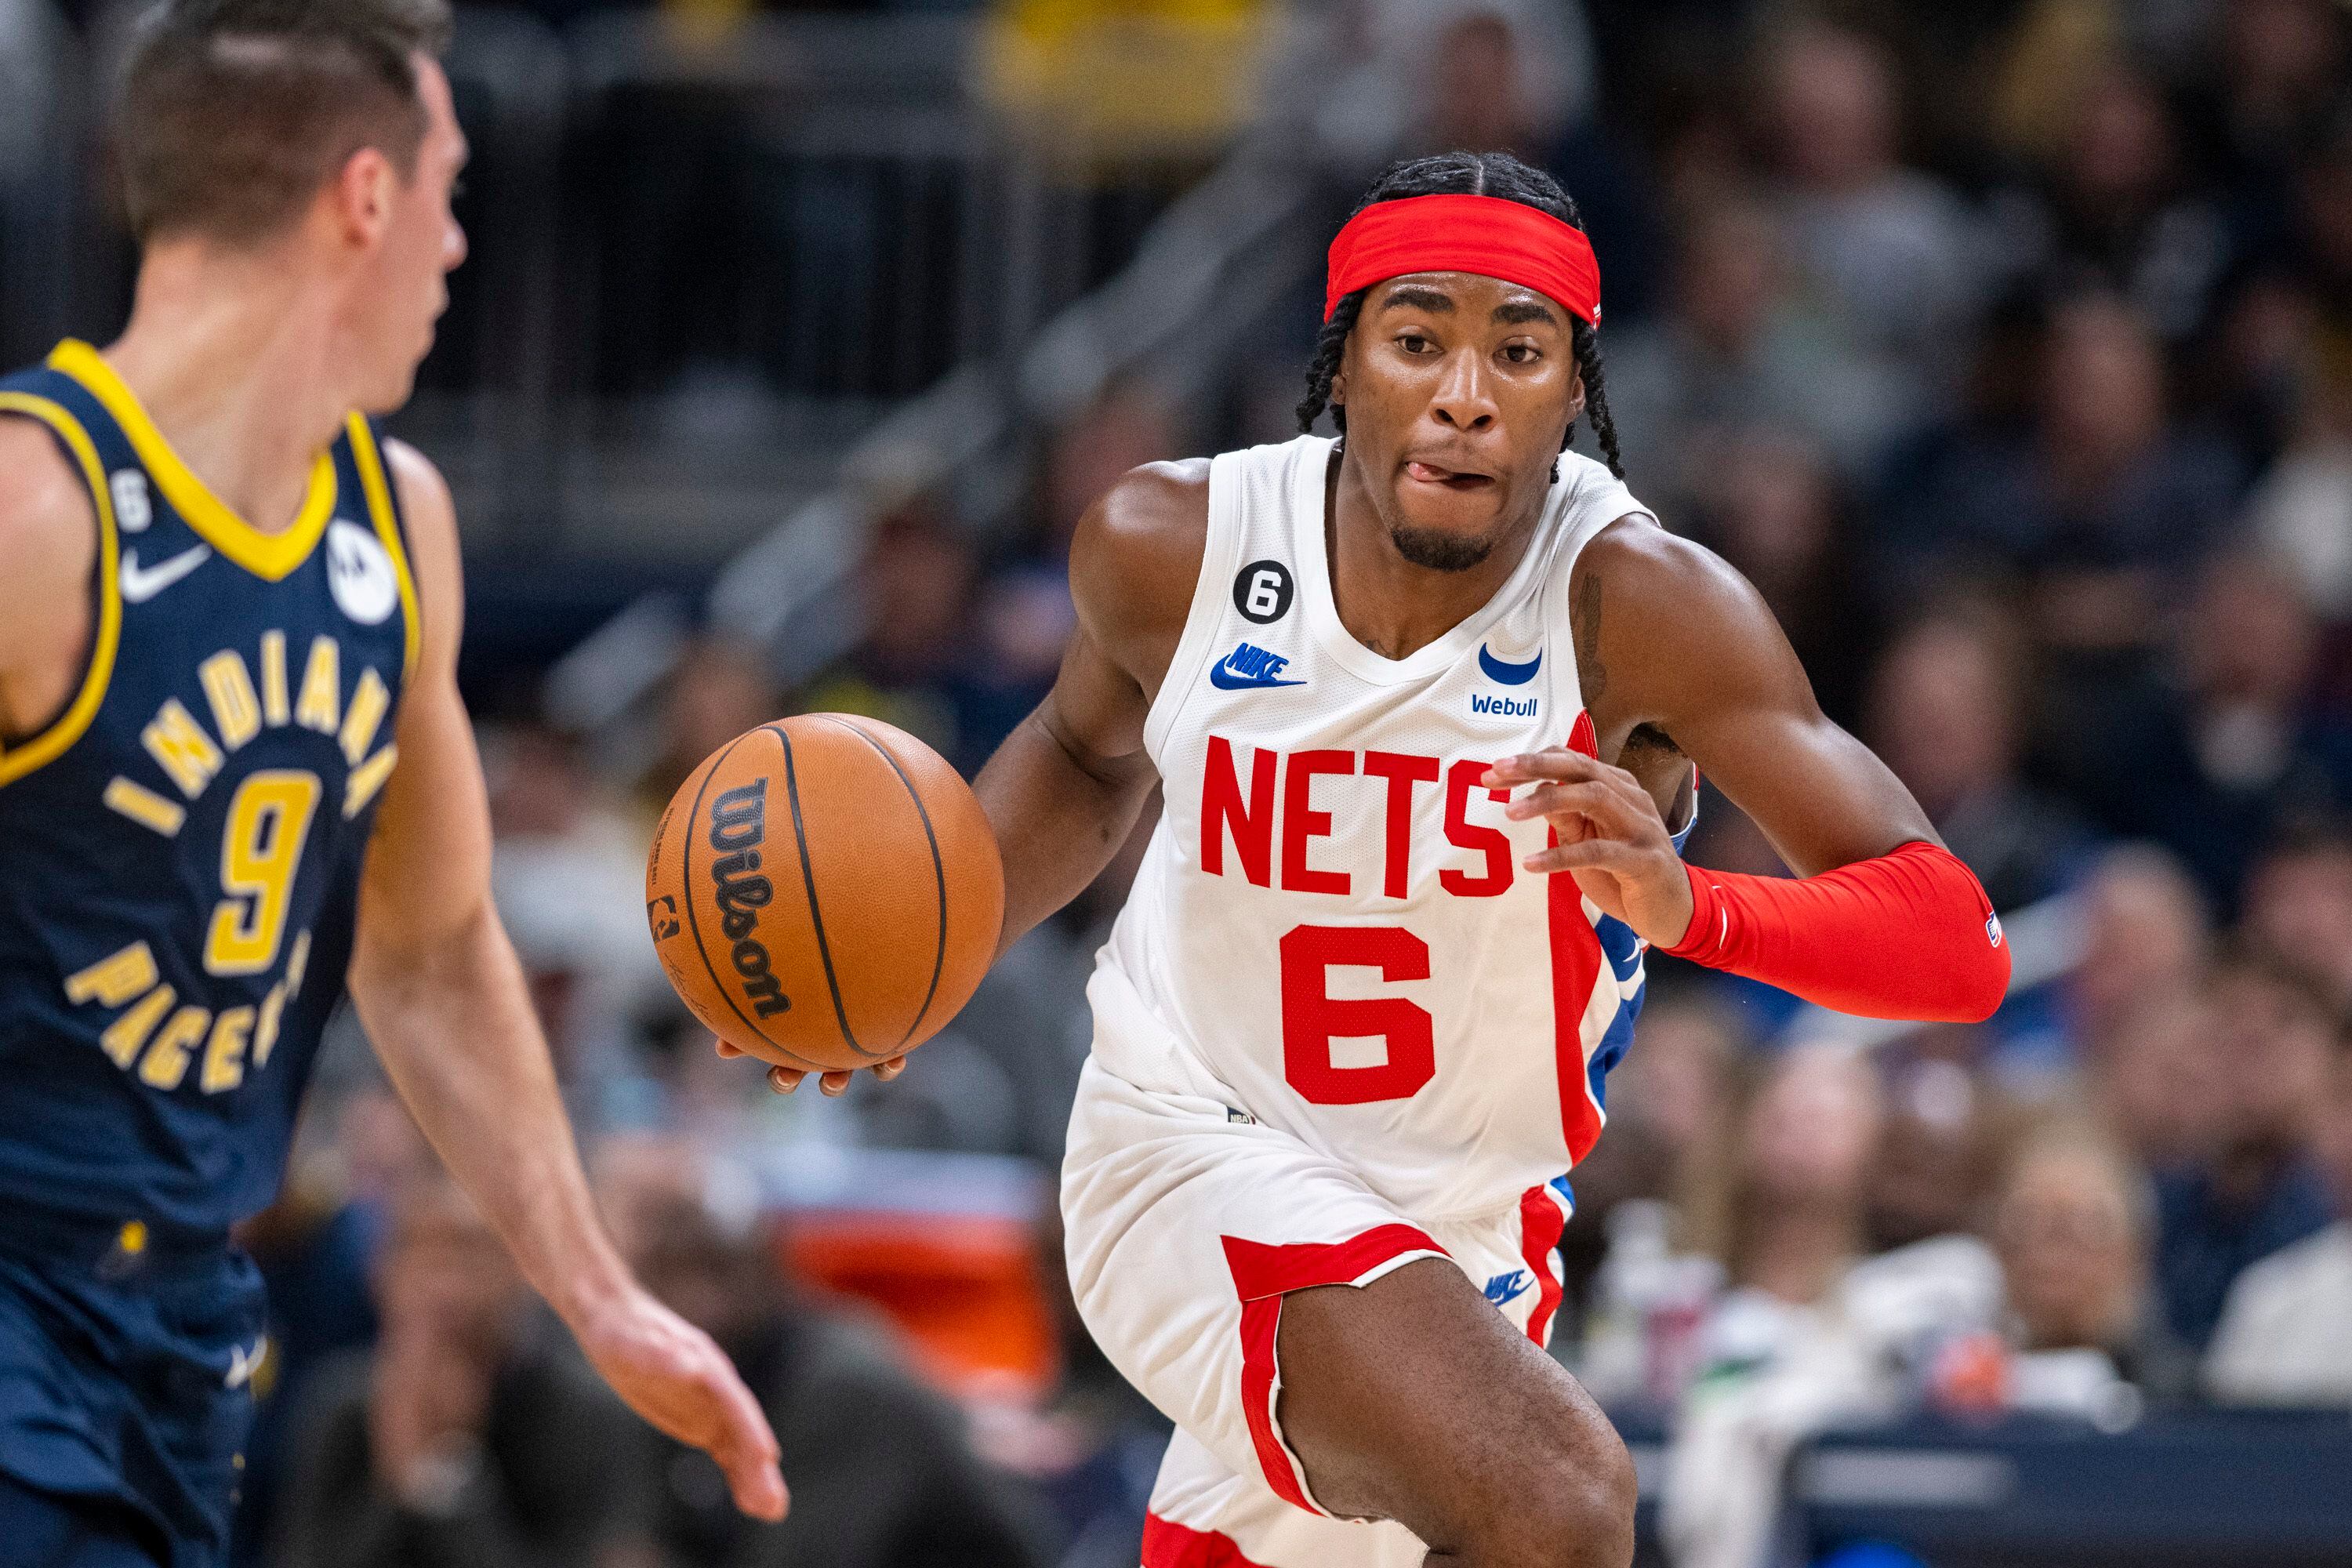 Brooklyn Nets forward David Duke Jr. (6) runs the ball up the court during the first half of an NBA basketball game against the Indiana Pacers in Indianapolis, Saturday, Dec. 10, 2022. (AP Photo/Doug McSchooler)